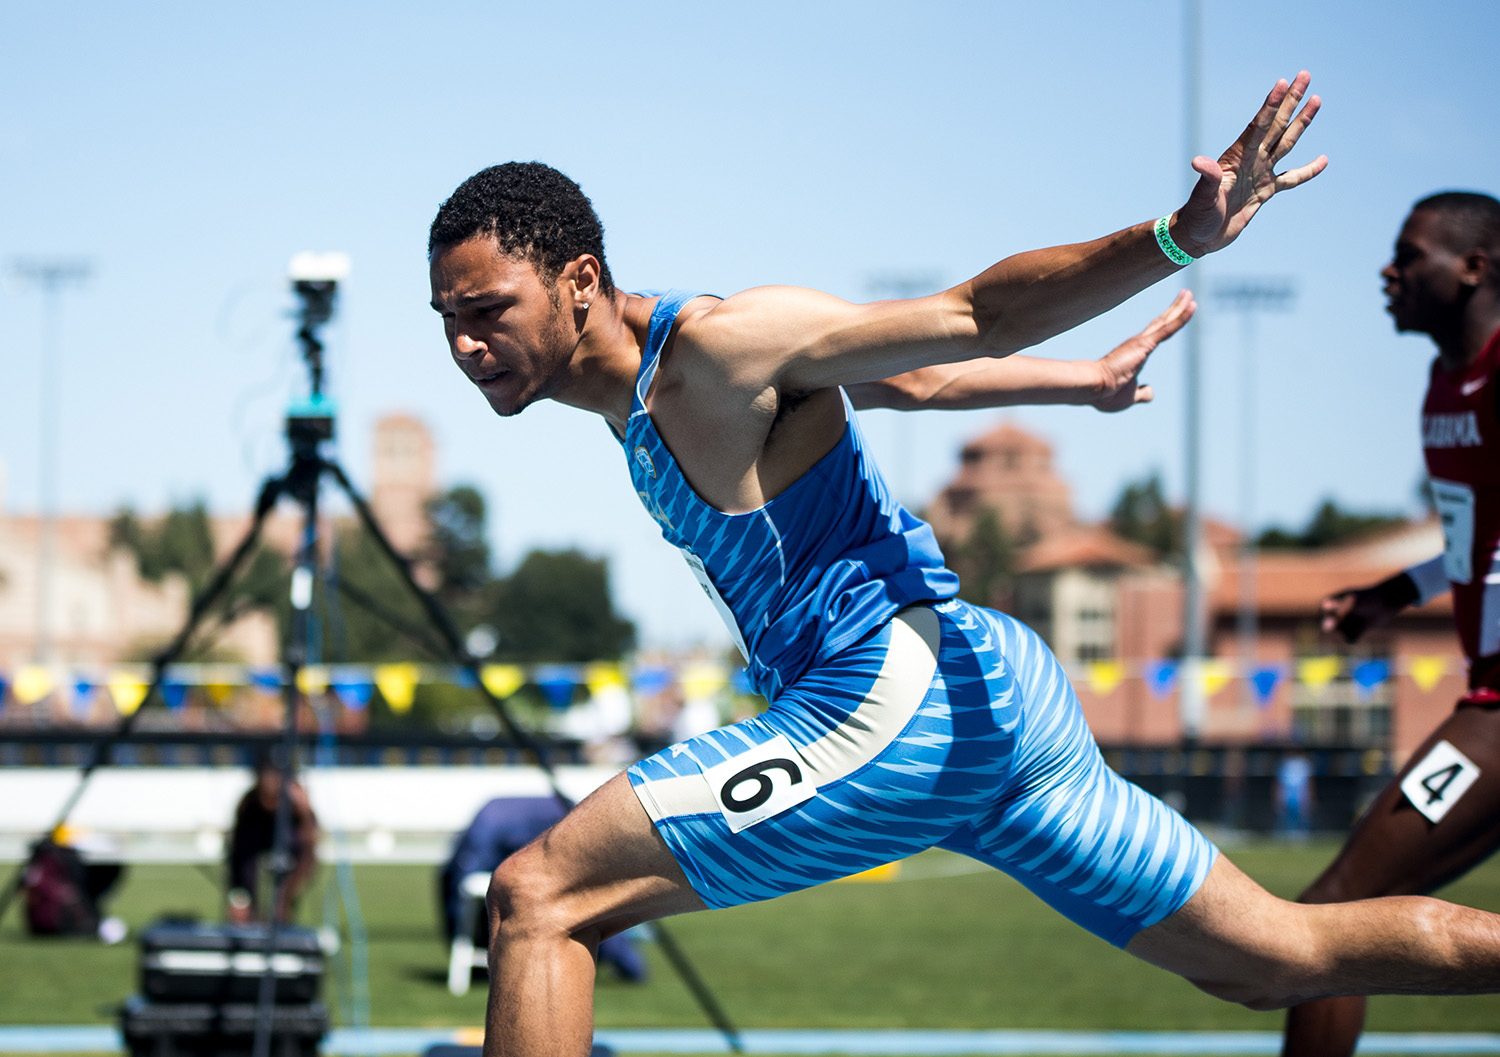 UCLA athletes head to Oregon for NCAA track and field championships